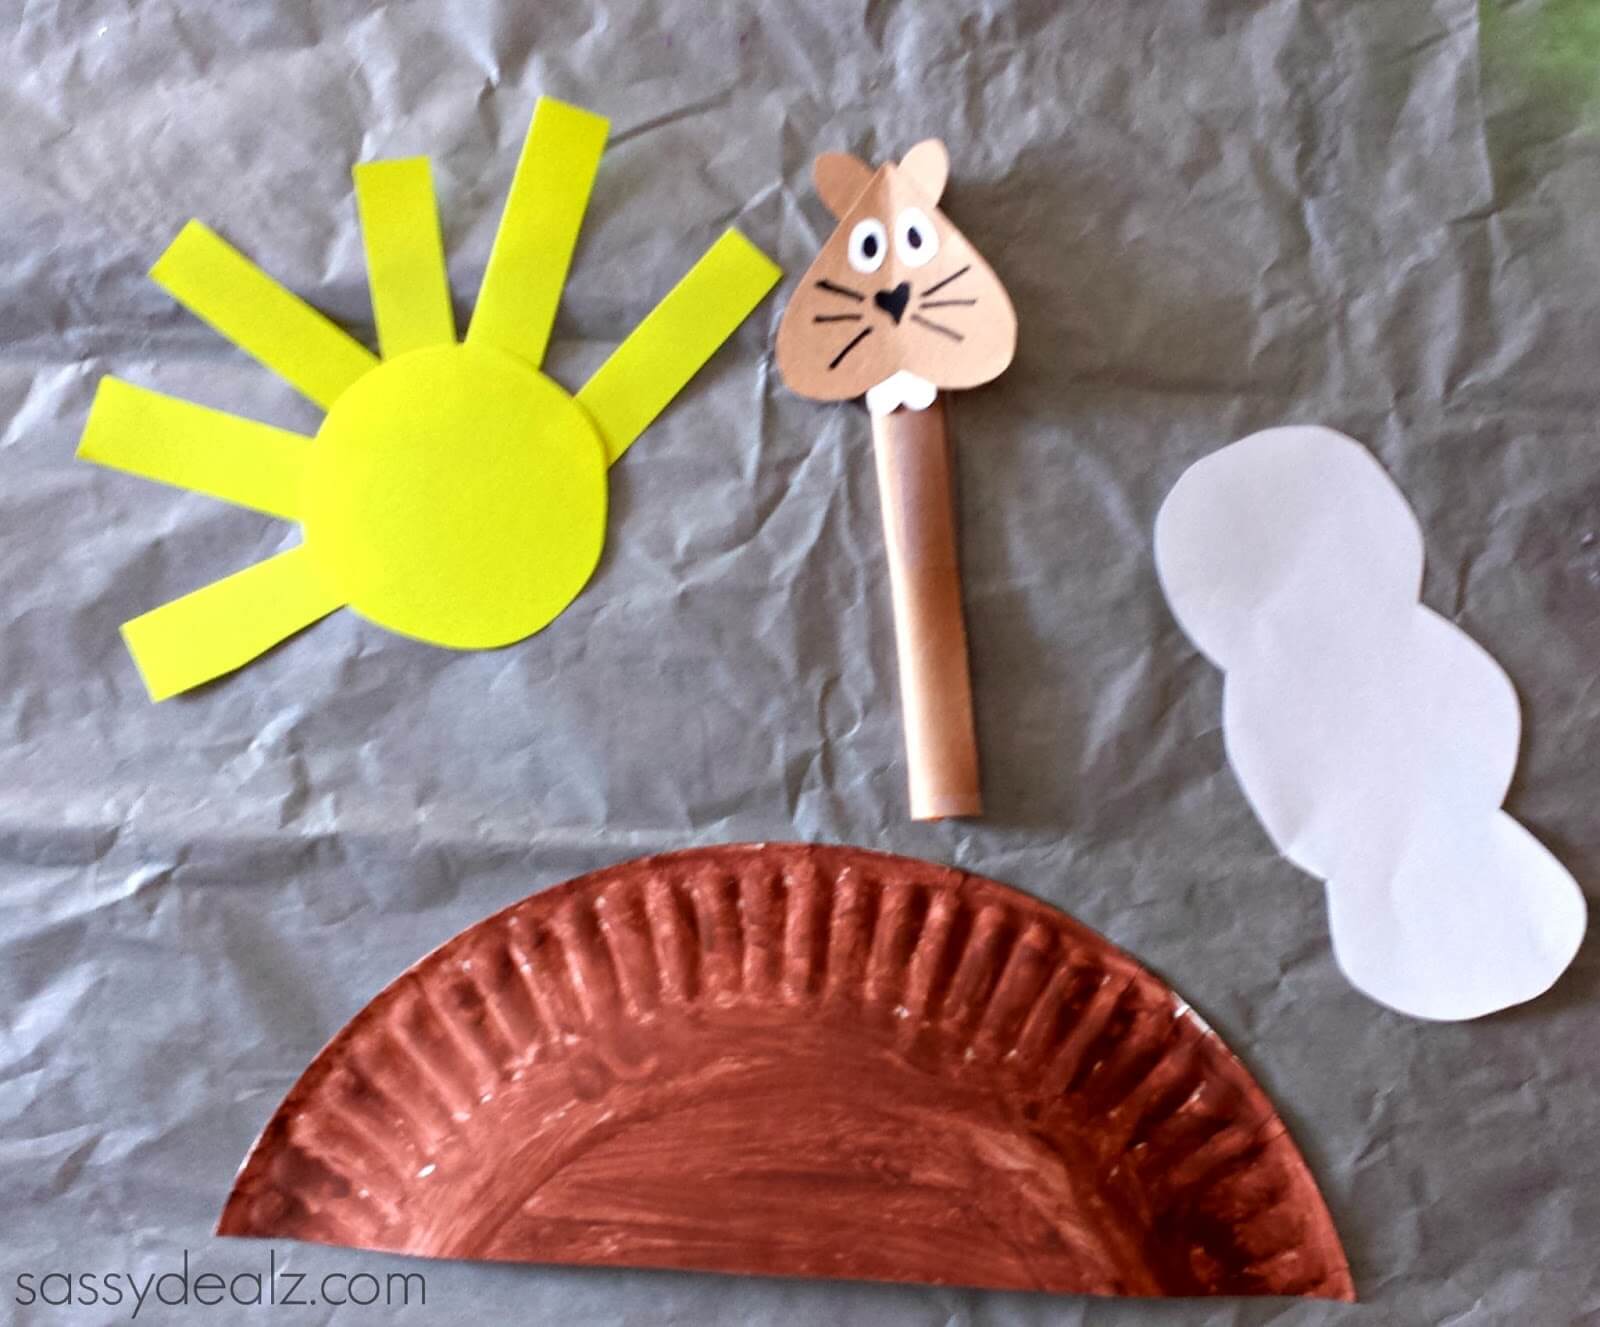 Cute Paper Plate Hotdog Crafts For Kids Groundhog Day Crafts For Kids